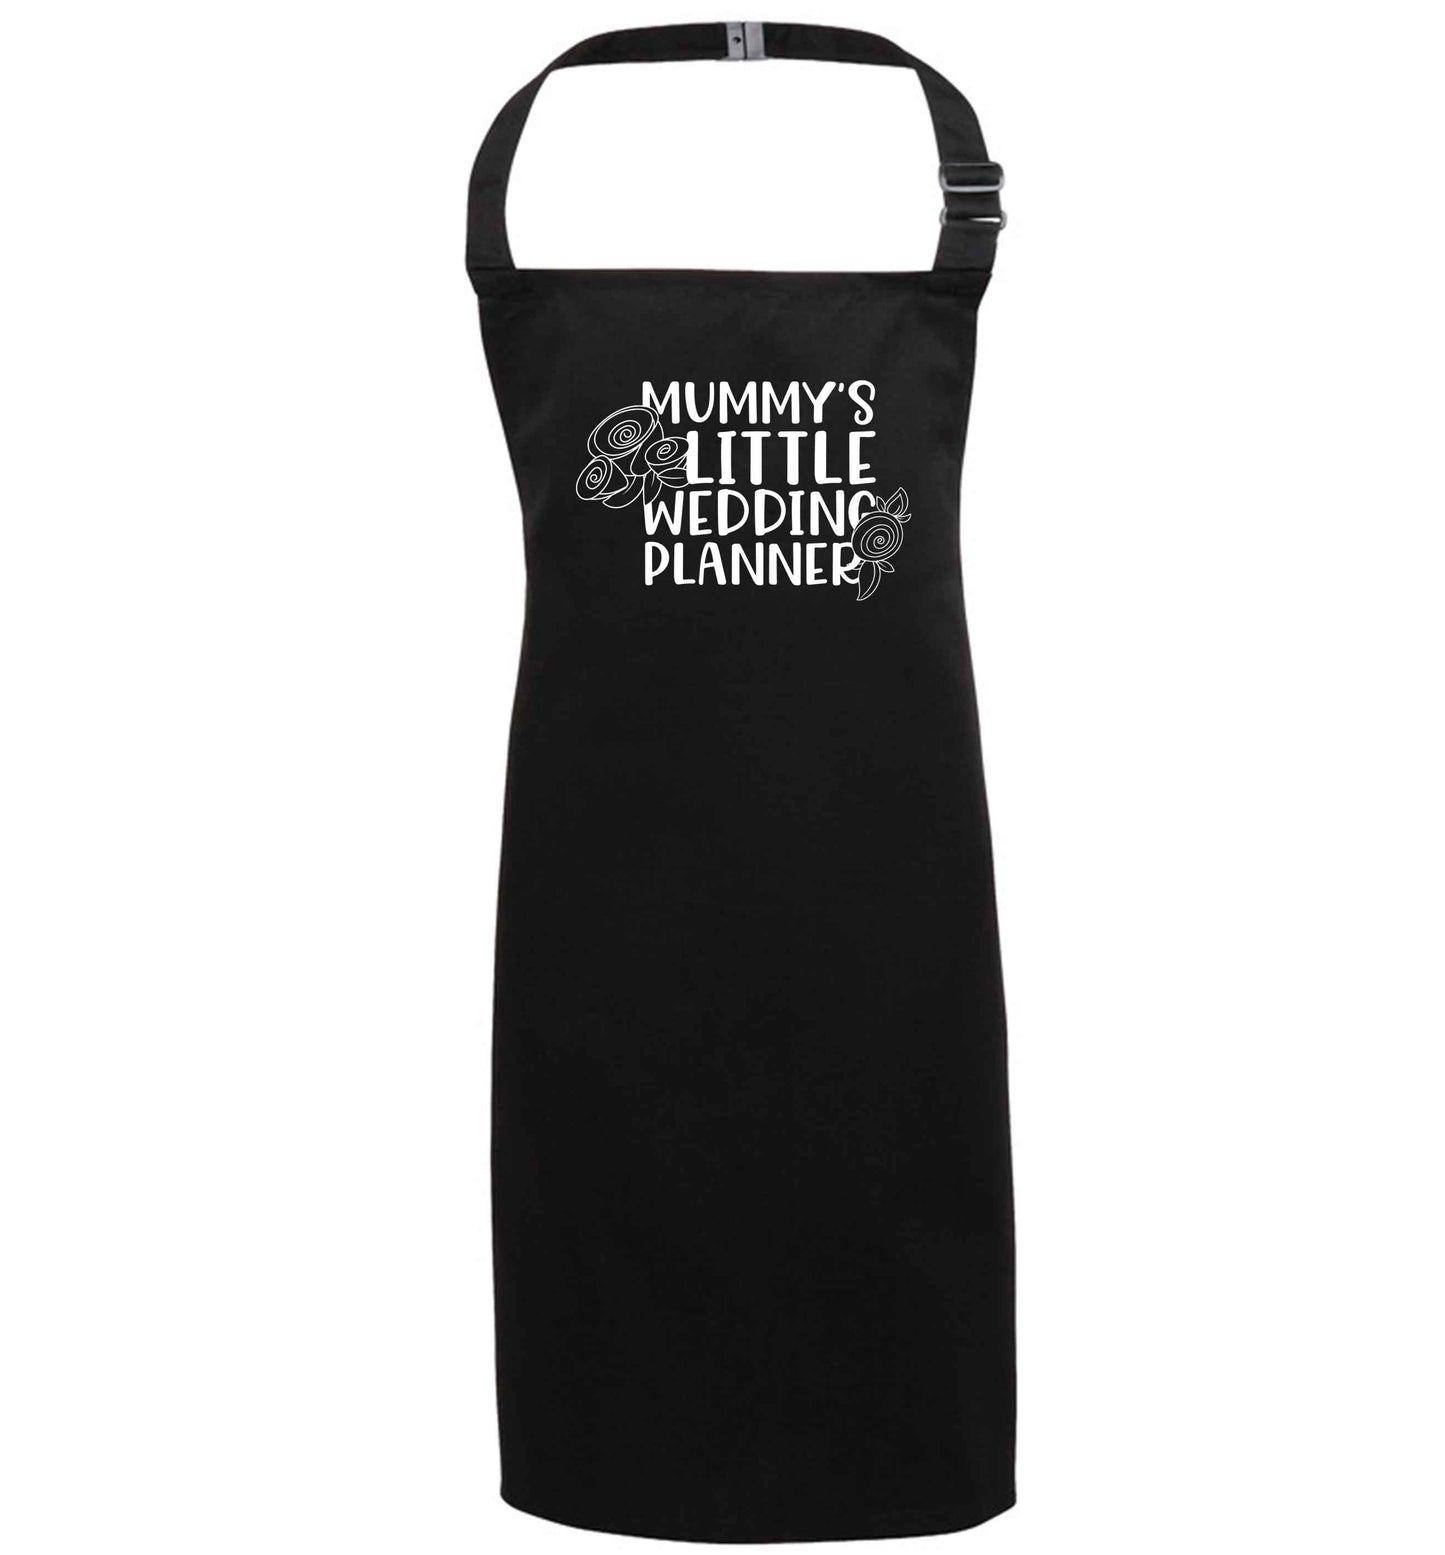 adorable wedding themed gifts for your mini wedding planner! black apron 7-10 years